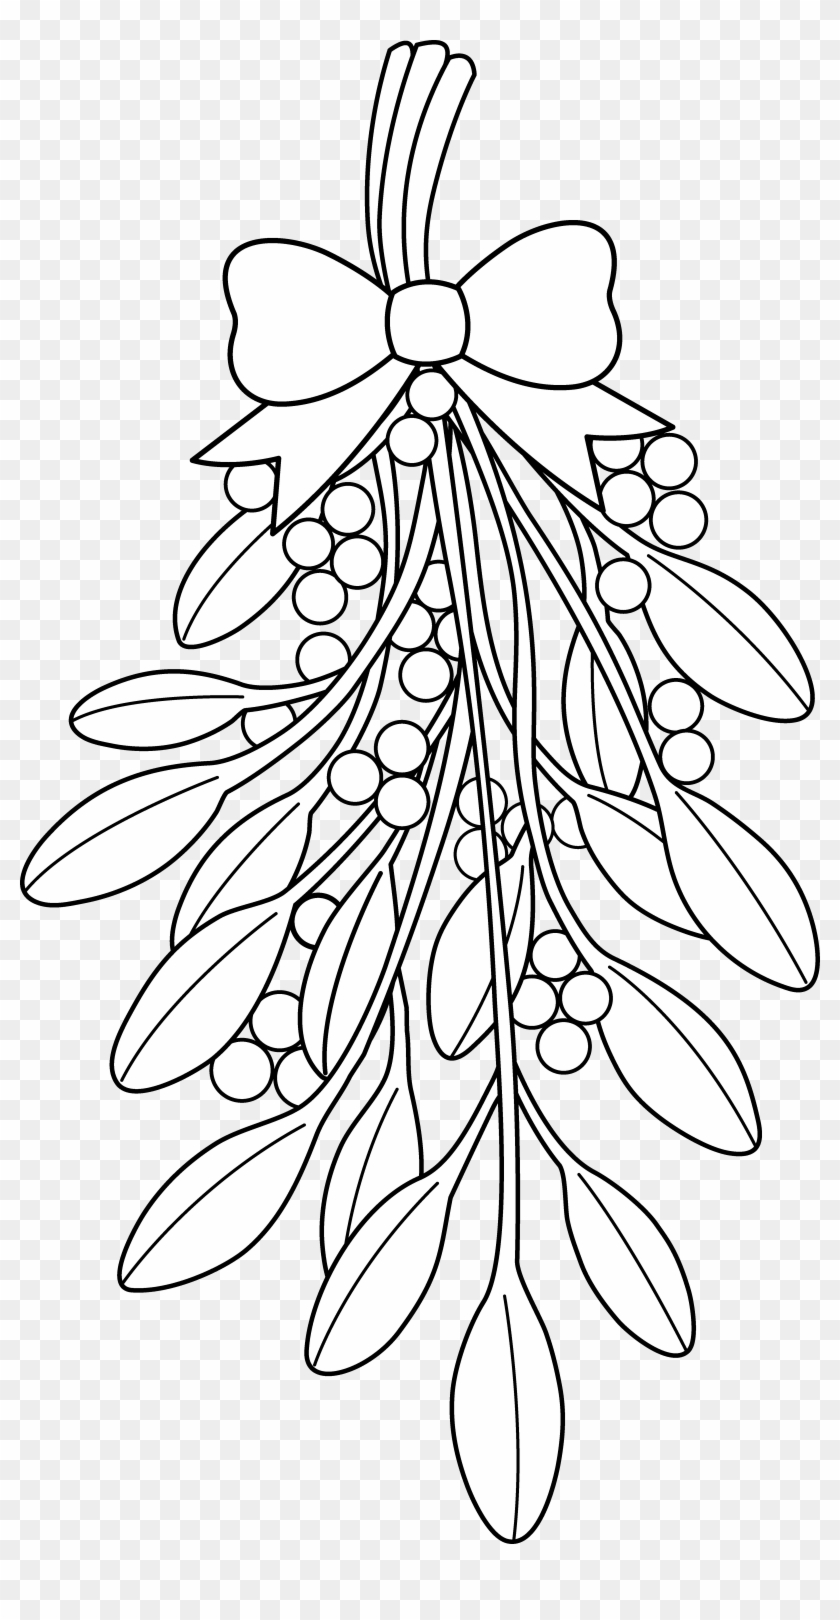 Christmas Holly Coloring Page 2 With Pages Mistletoe - Christmas Mistletoe Coloring Pages Clipart #875909